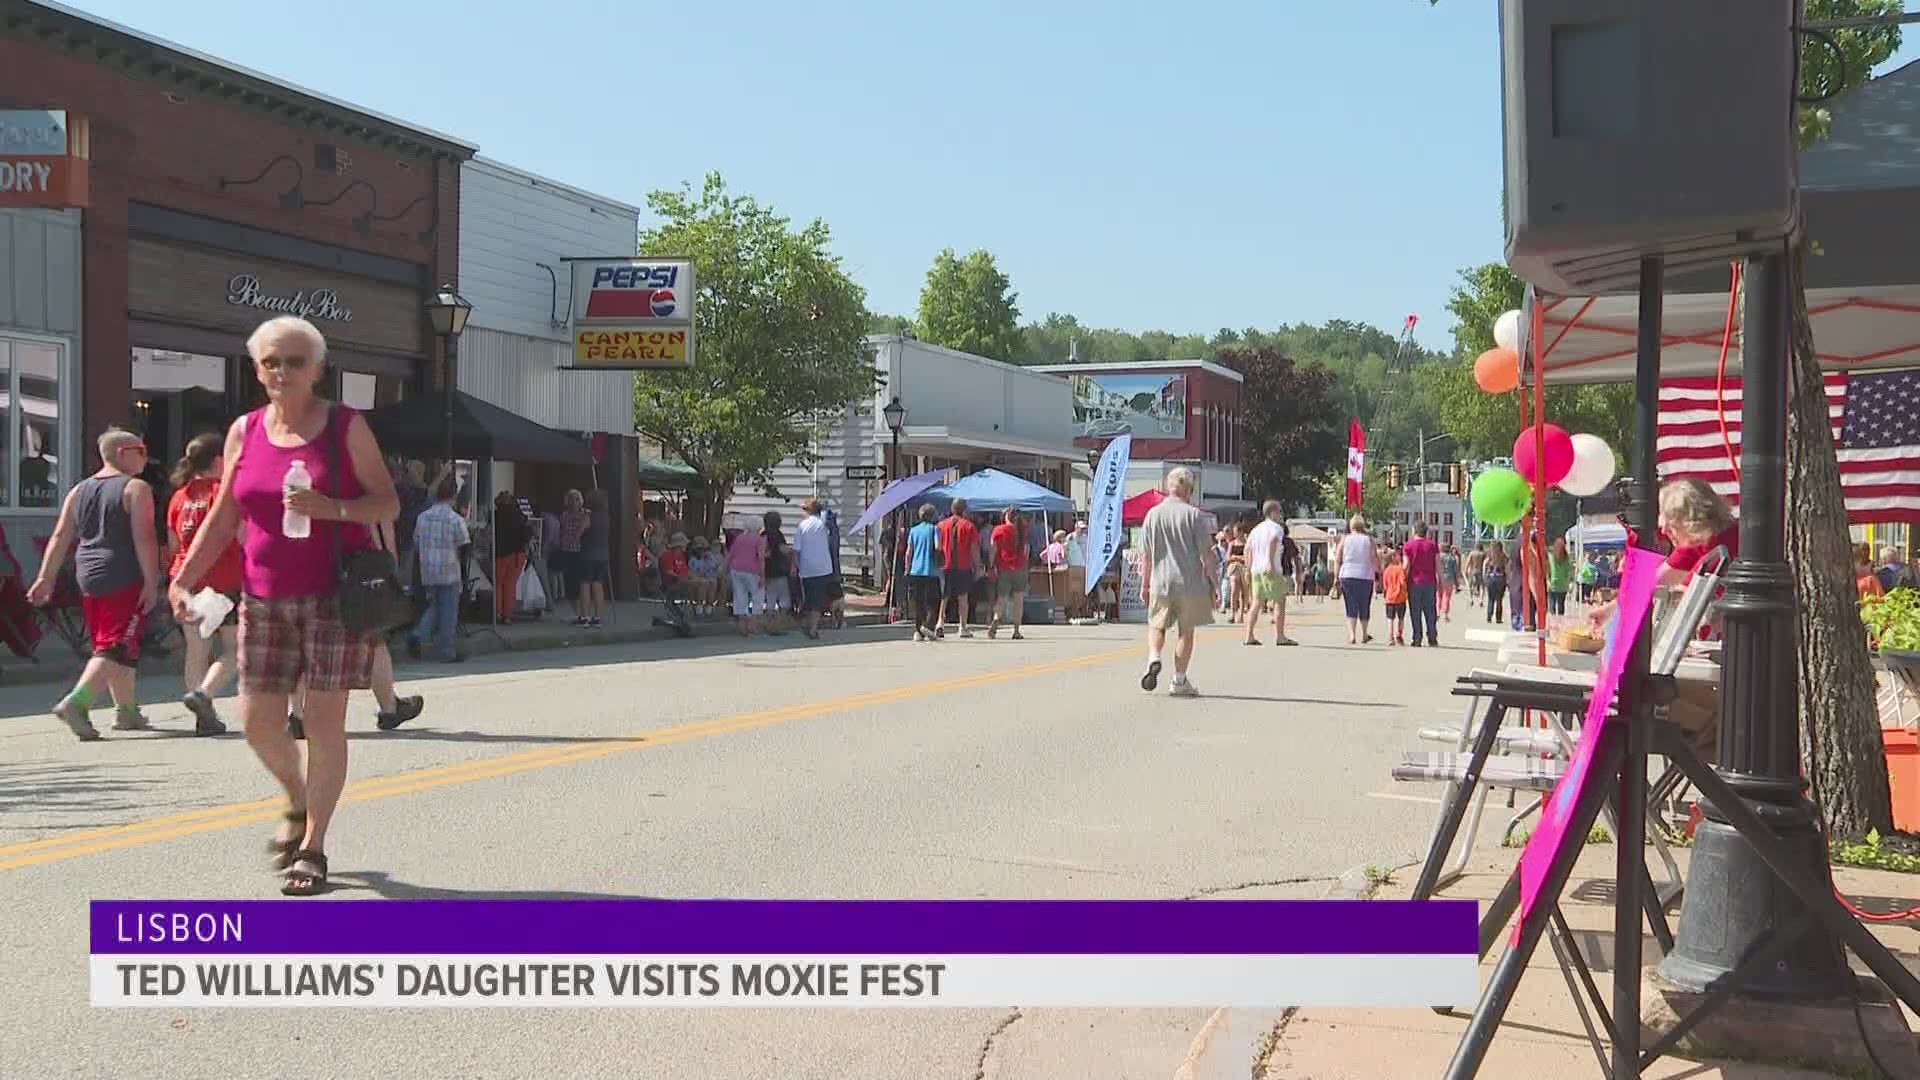 Lisbon hosts 37th annual Moxie Festival and special guest, Claudia Williams, daughter of Red Sox legend Ted Williams, helped the town to celebrate.